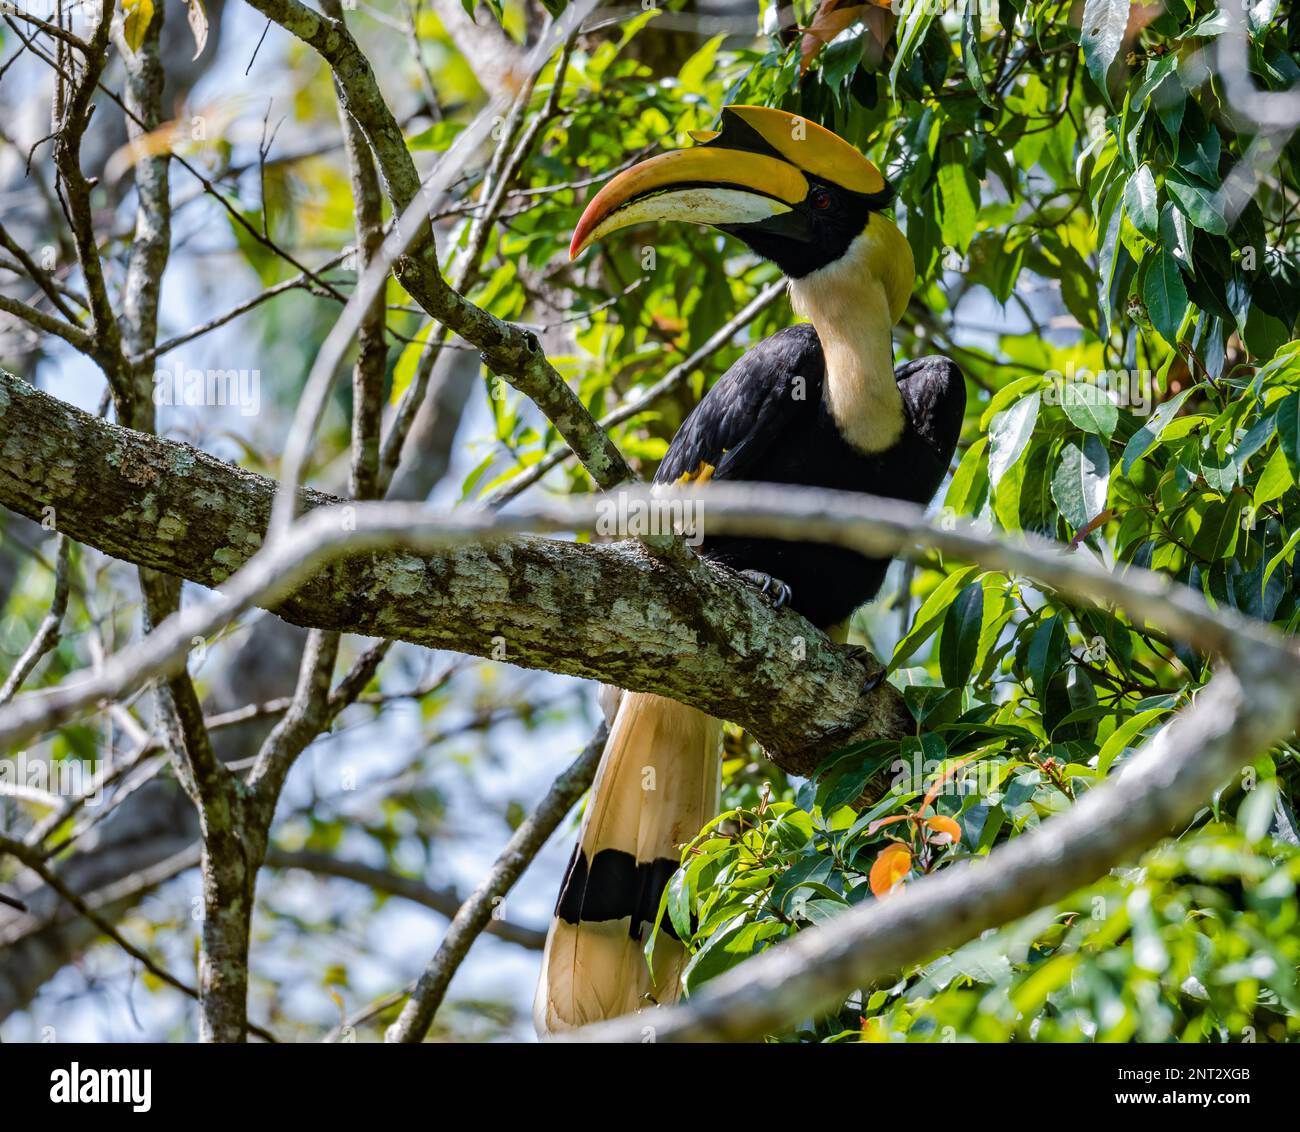 A wild Great Hornbill (Buceros bicornis) perched on a tree. Thailand. Stock Photo